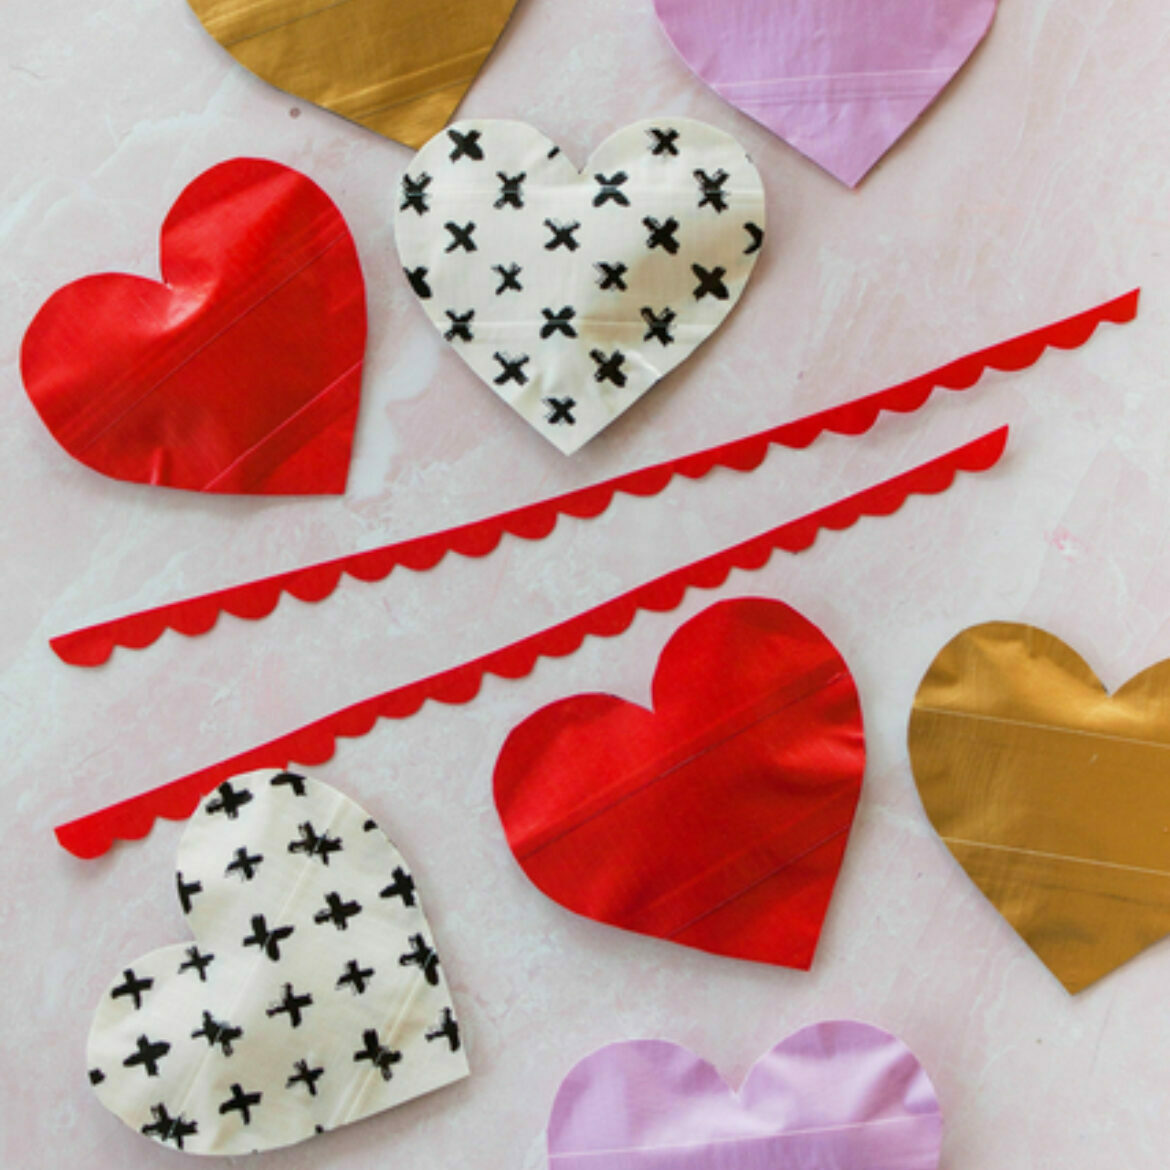 8 duct tape hearts in various colors and prints with a red duct tape garland laid on a white surface